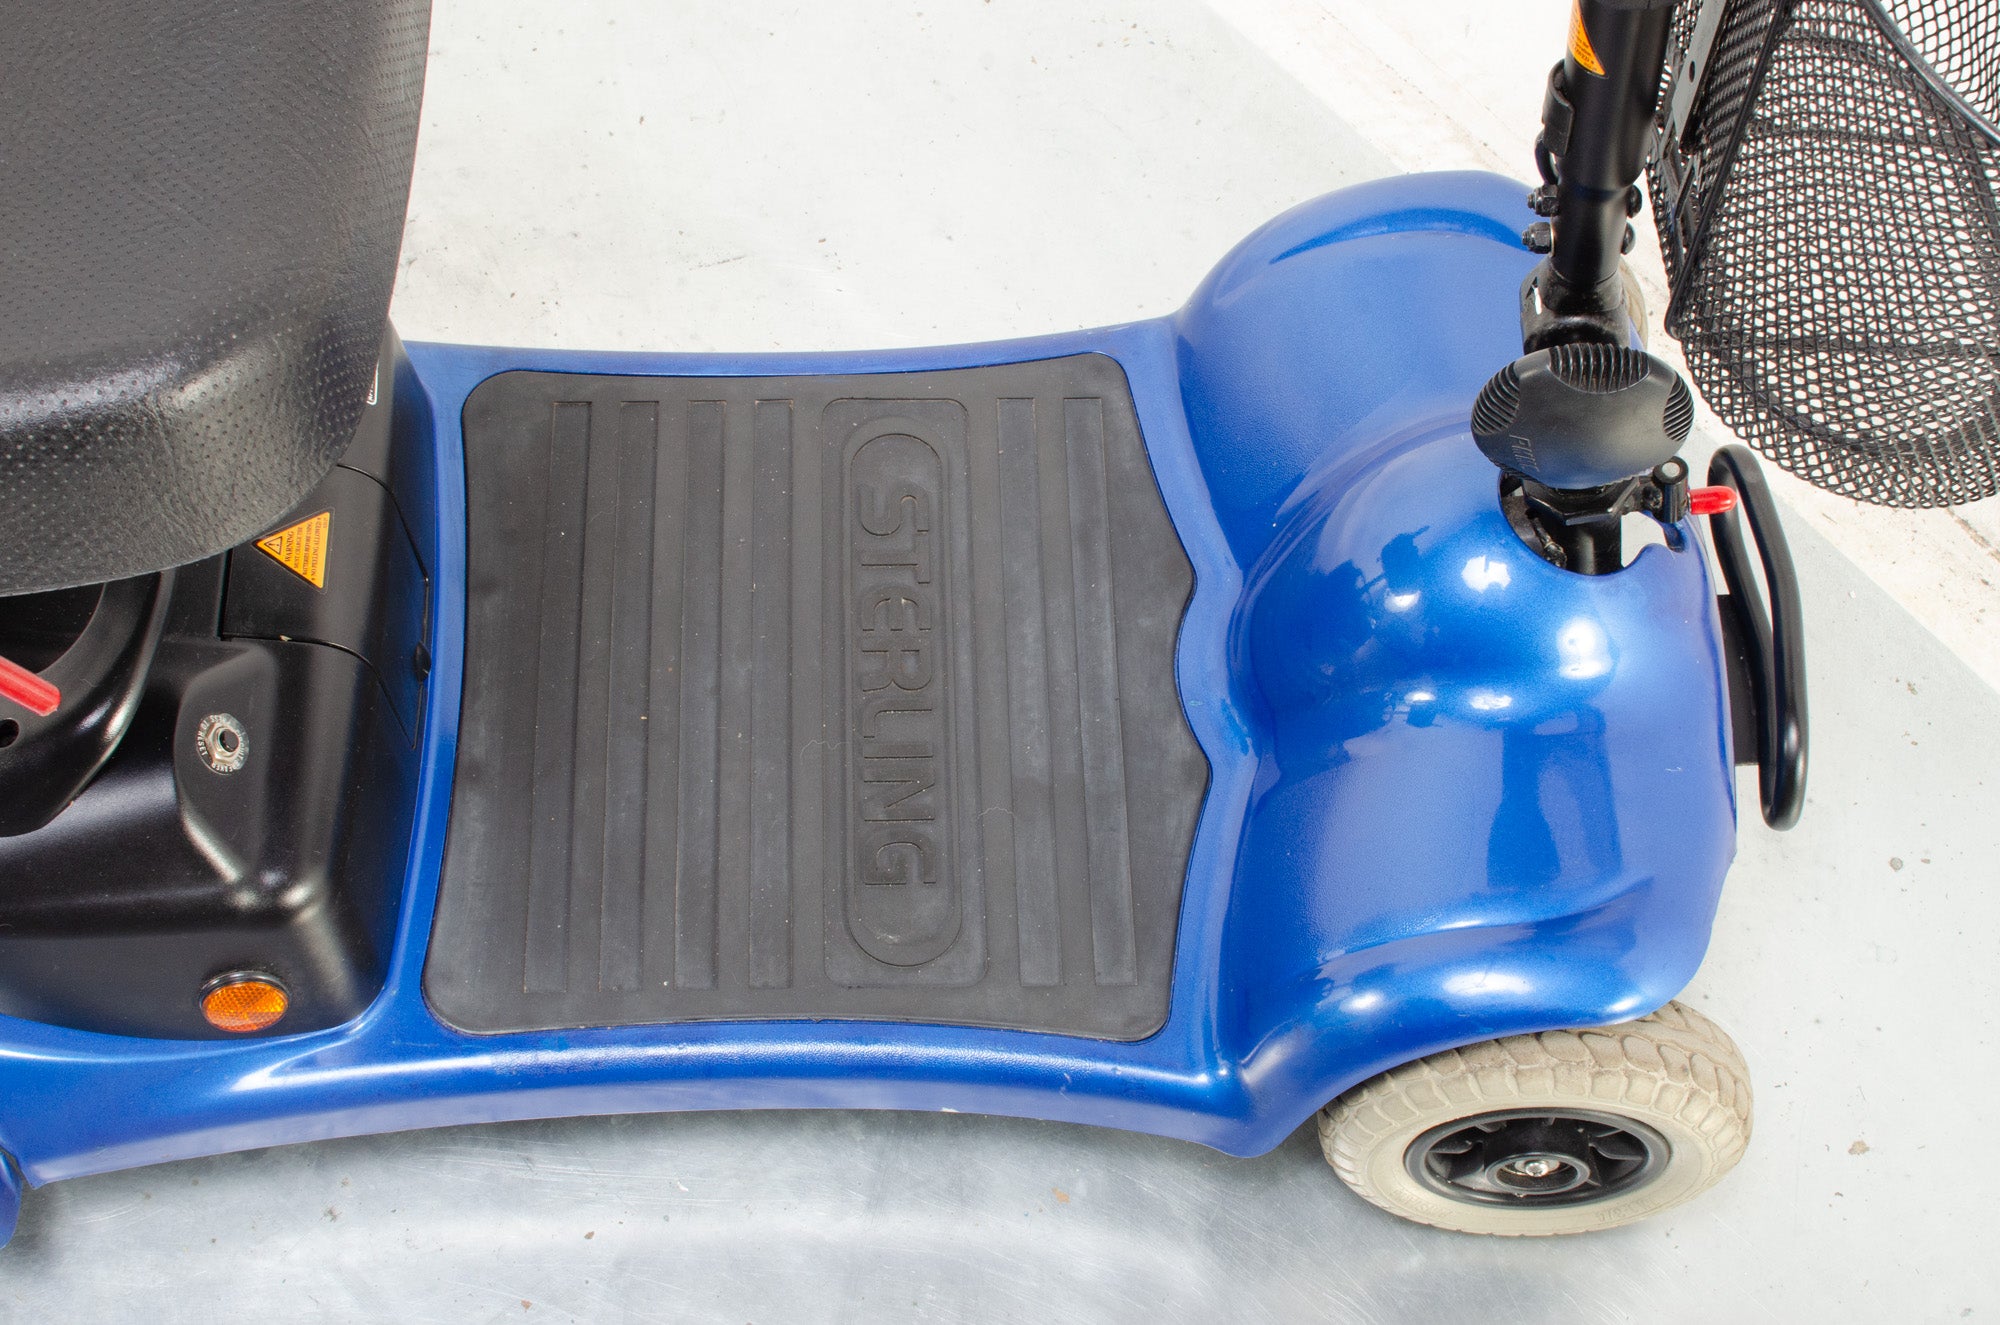 2019 Roma Shoprider Paris 4mph Transportable Mobility Boot Scooter in Blue